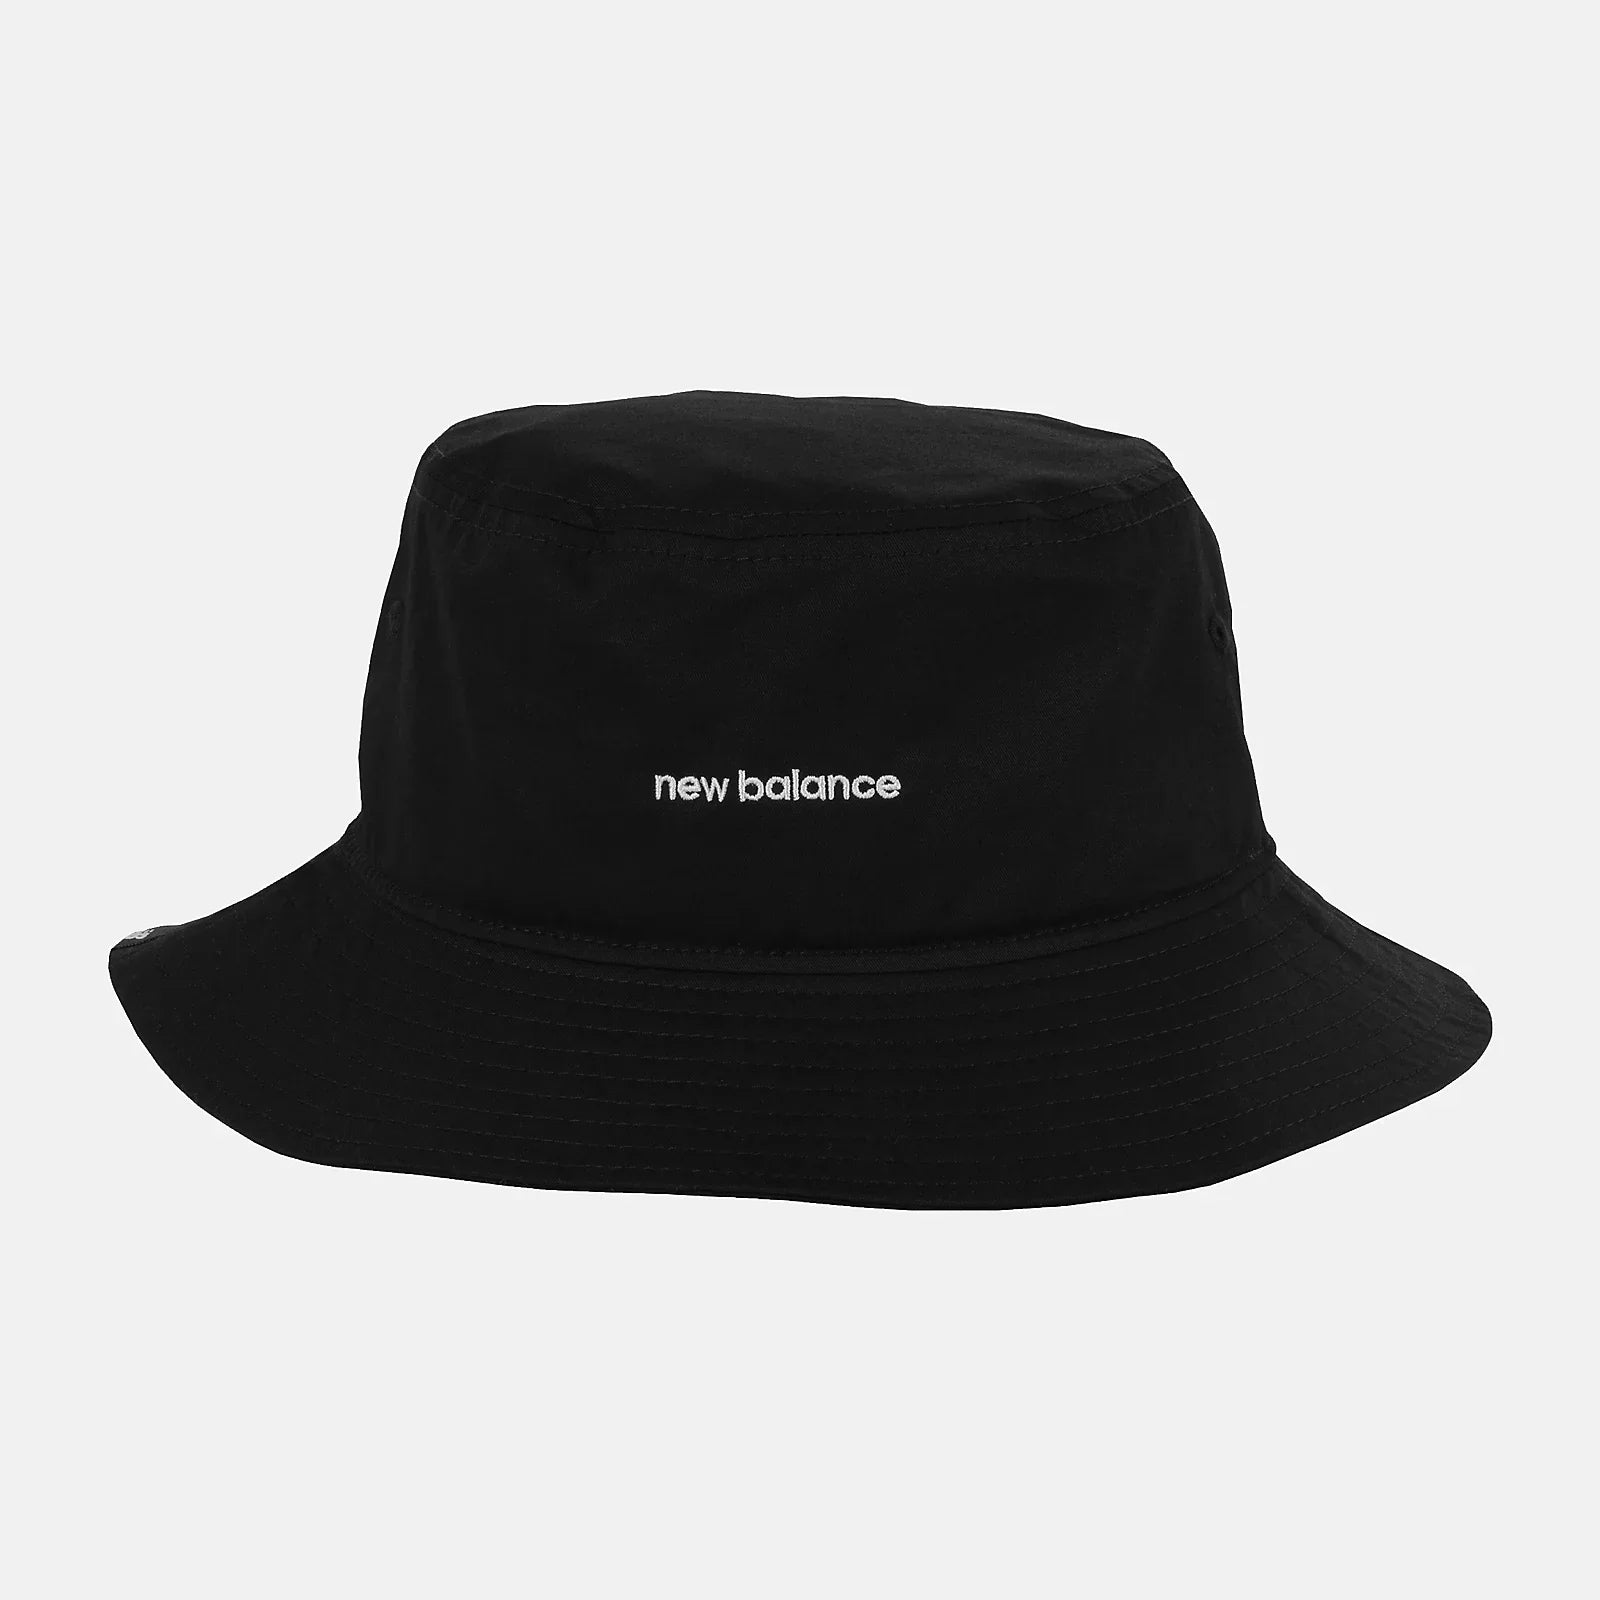 NEW BALANCE Bucket Hat in Black LAH13003 O/S BLACK FROM EIGHTYWINGOLD - OFFICIAL BRAND PARTNER